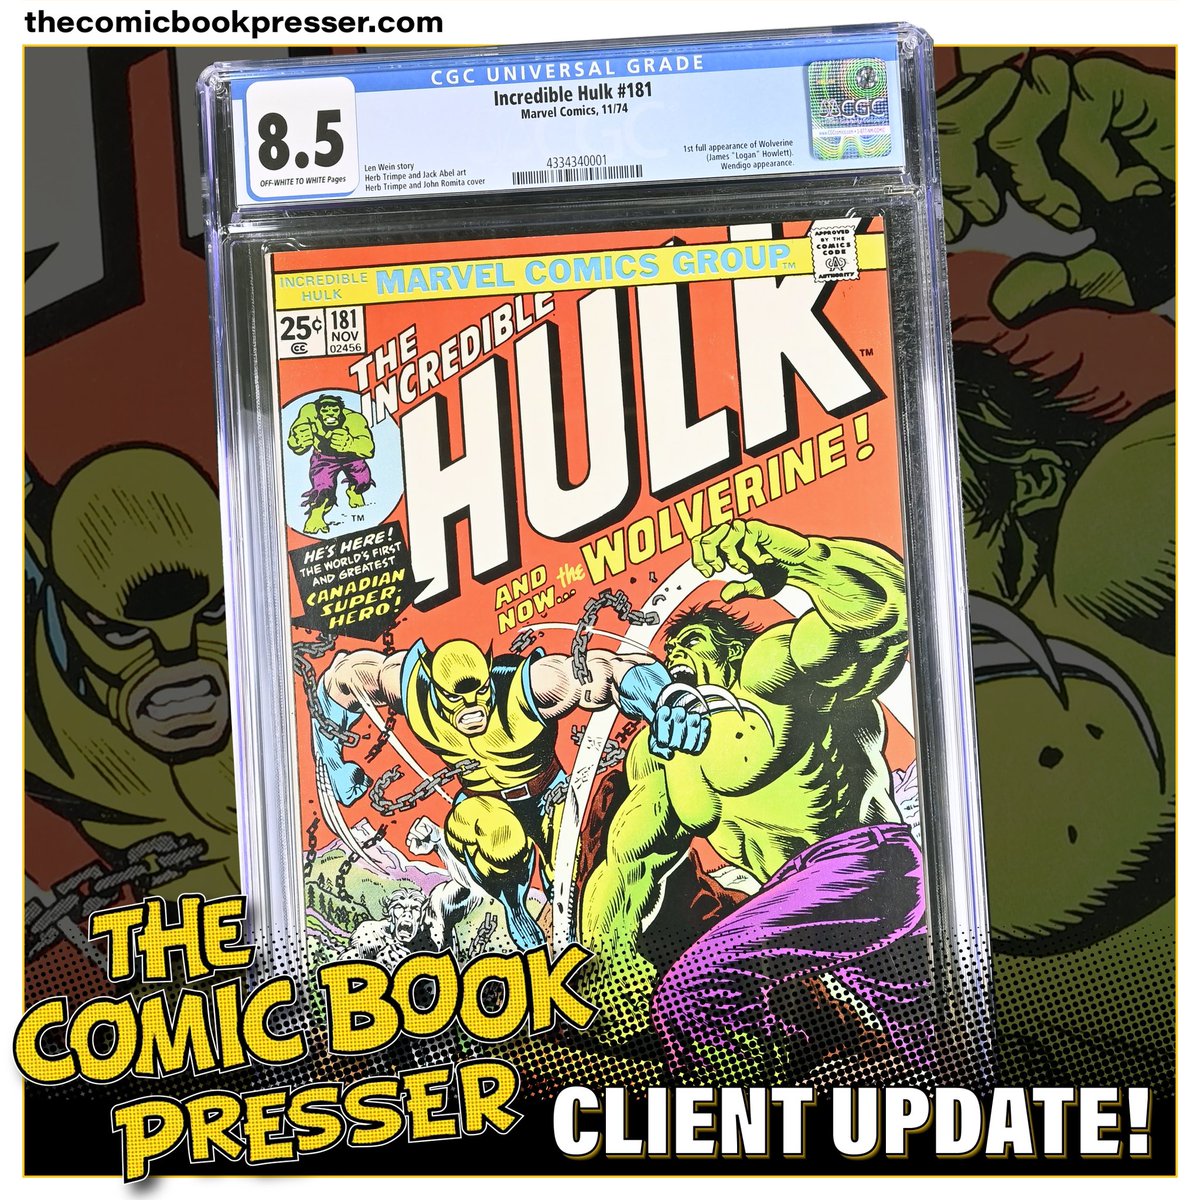 An awesome update from a client!

We are passionate about helping comic book collectors preserve and enhance their collections.

#thecomicbookpresser #comicpressing #comicbookpressing #comicpressingresults #comicbooks #hulk181 #wolverine #marvelcomics